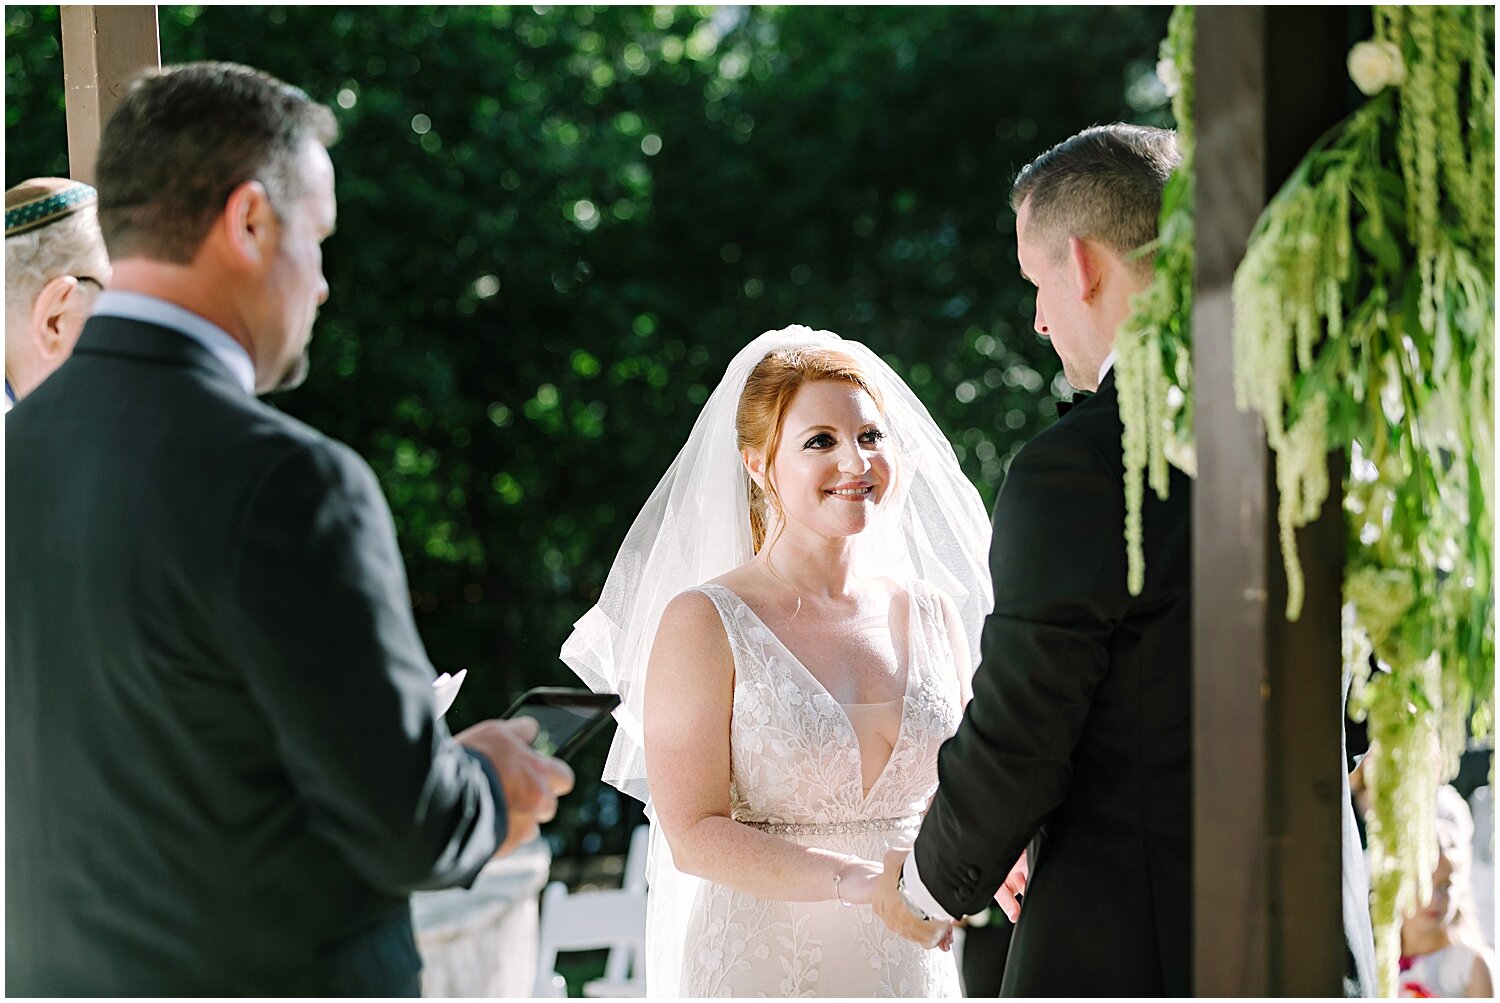  bride and groom during their outdoor wedding ceremony 